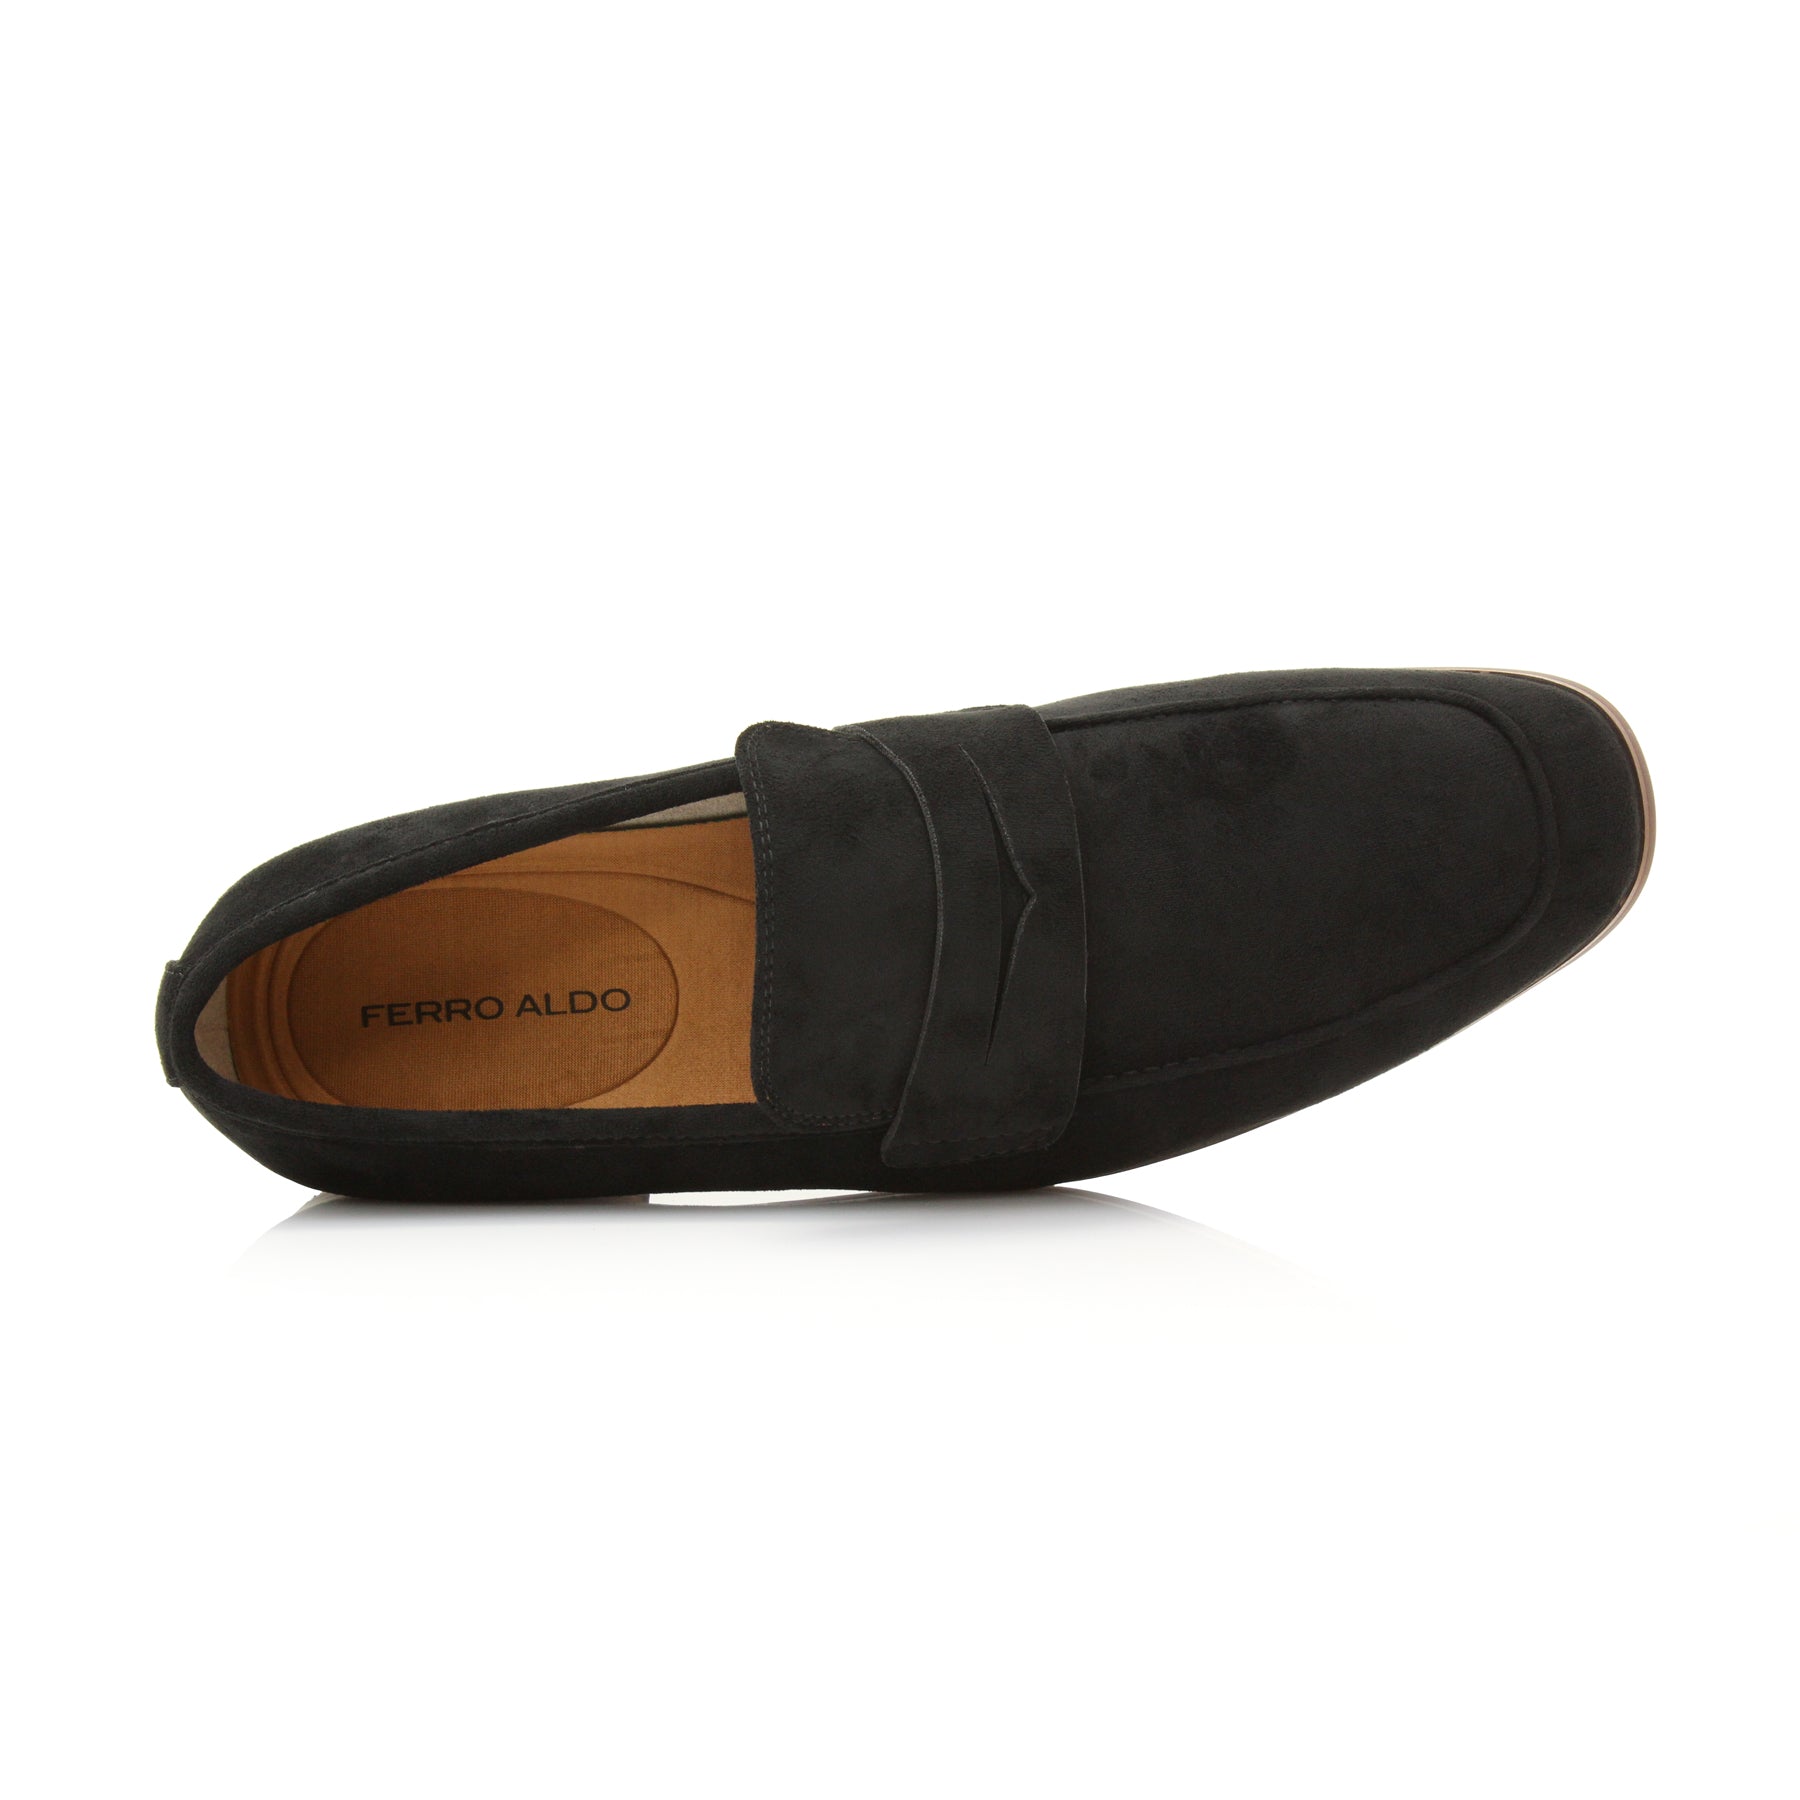 Suede Penny Loafers | Dylan by Ferro Aldo | Conal Footwear | Top-Down Angle View